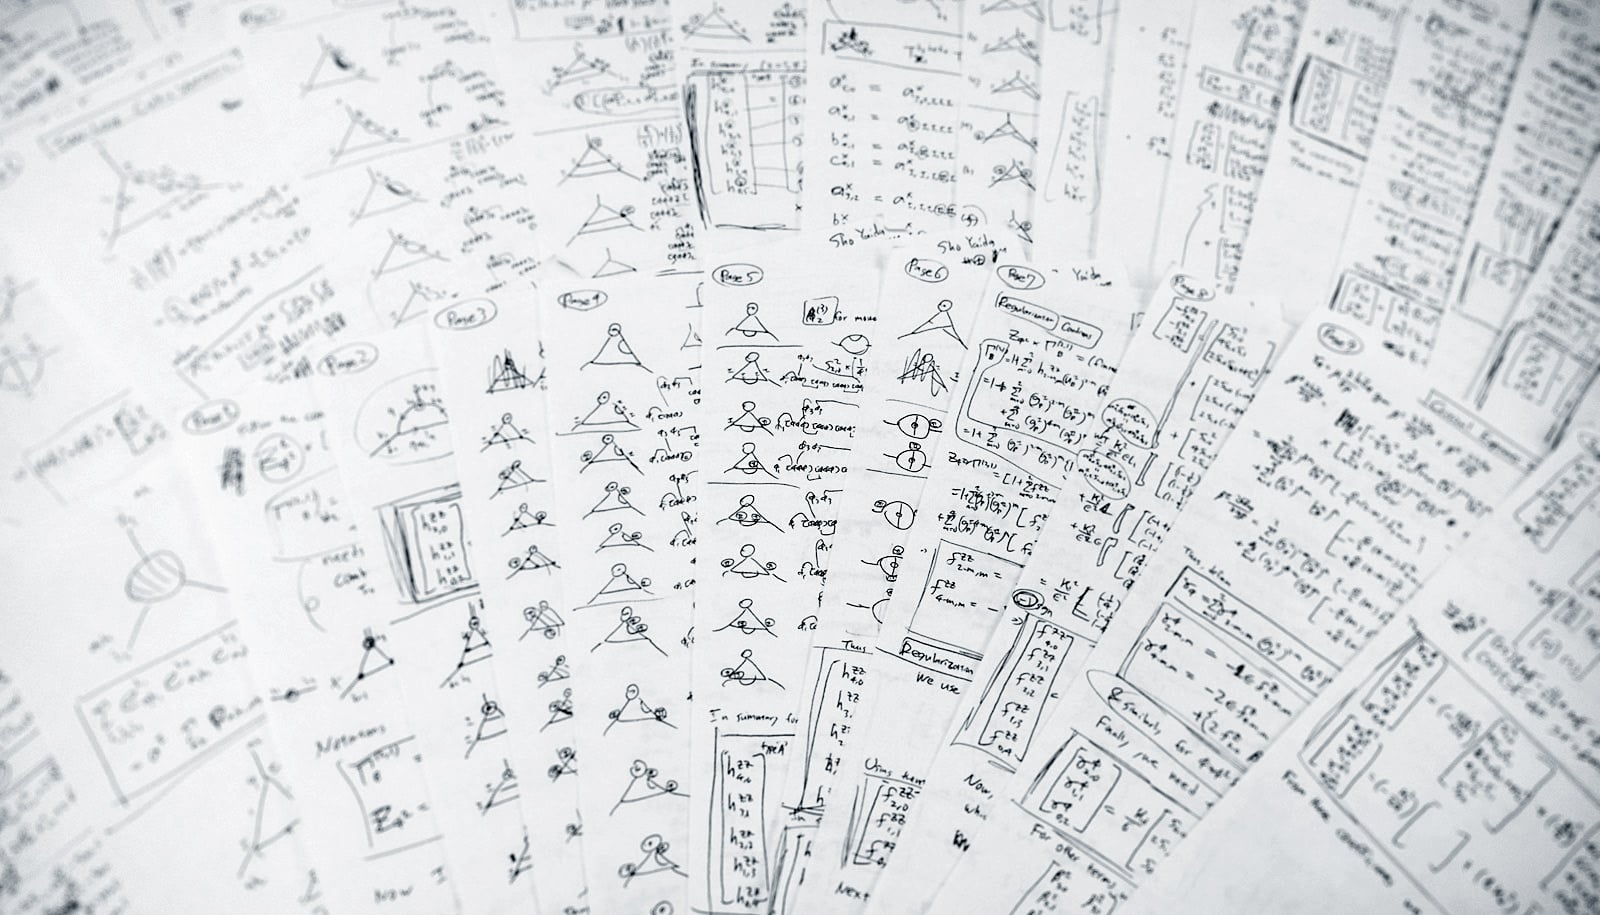 Sho Yaida's 30 handwritten pages of calculations.